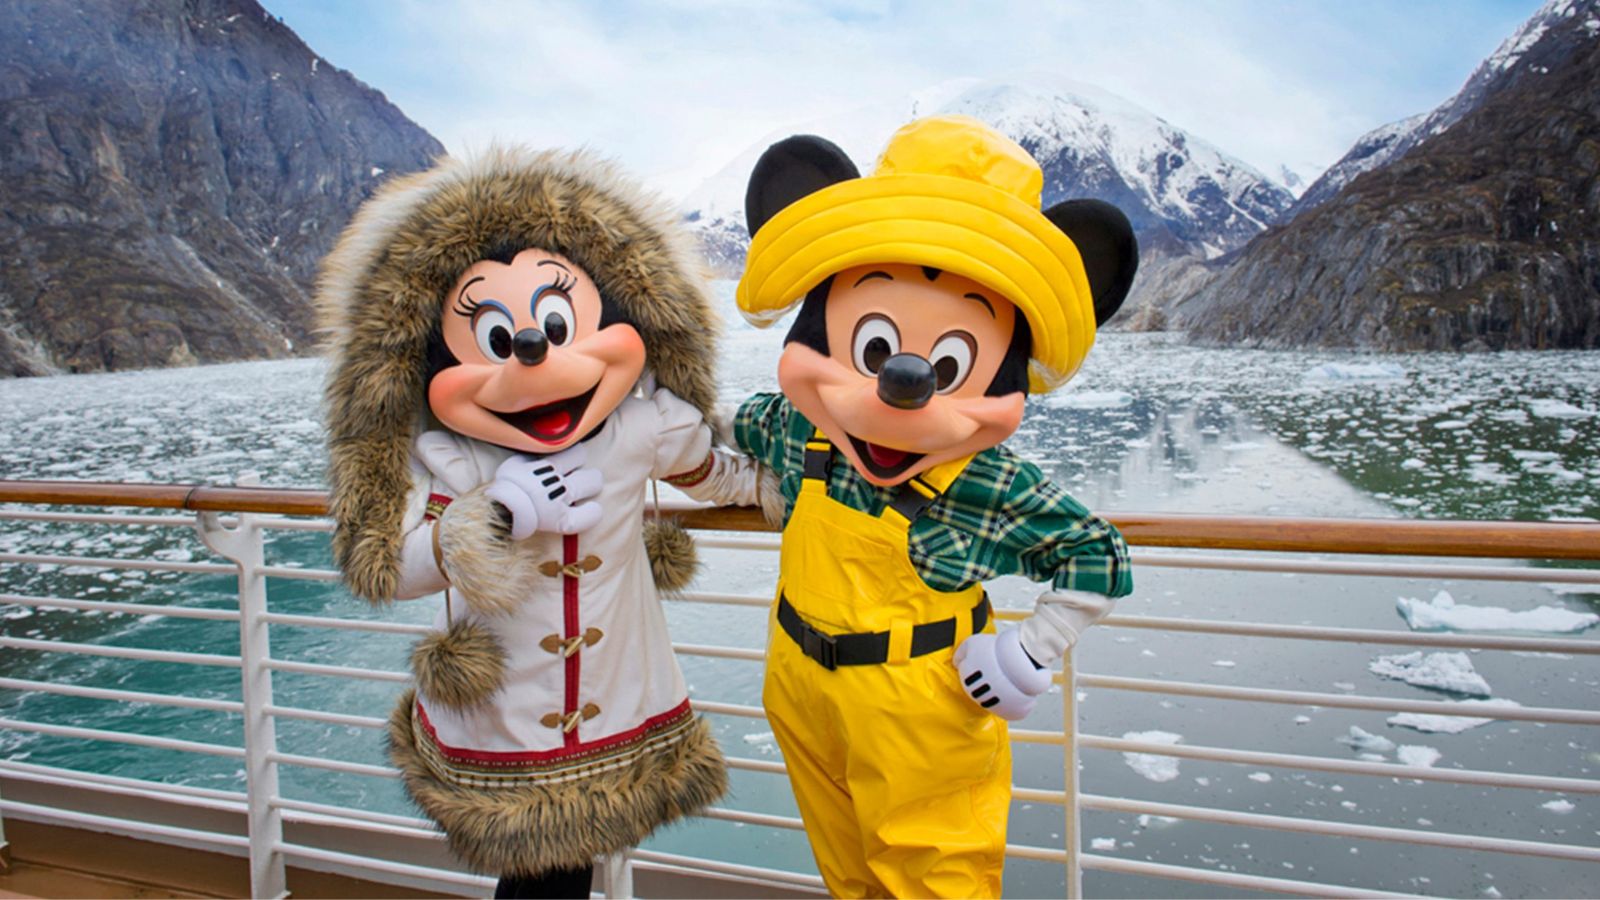 Minnie and Mickey Mouse on a Disney cruise in Alaska (Photo: Disney Cruise Line)